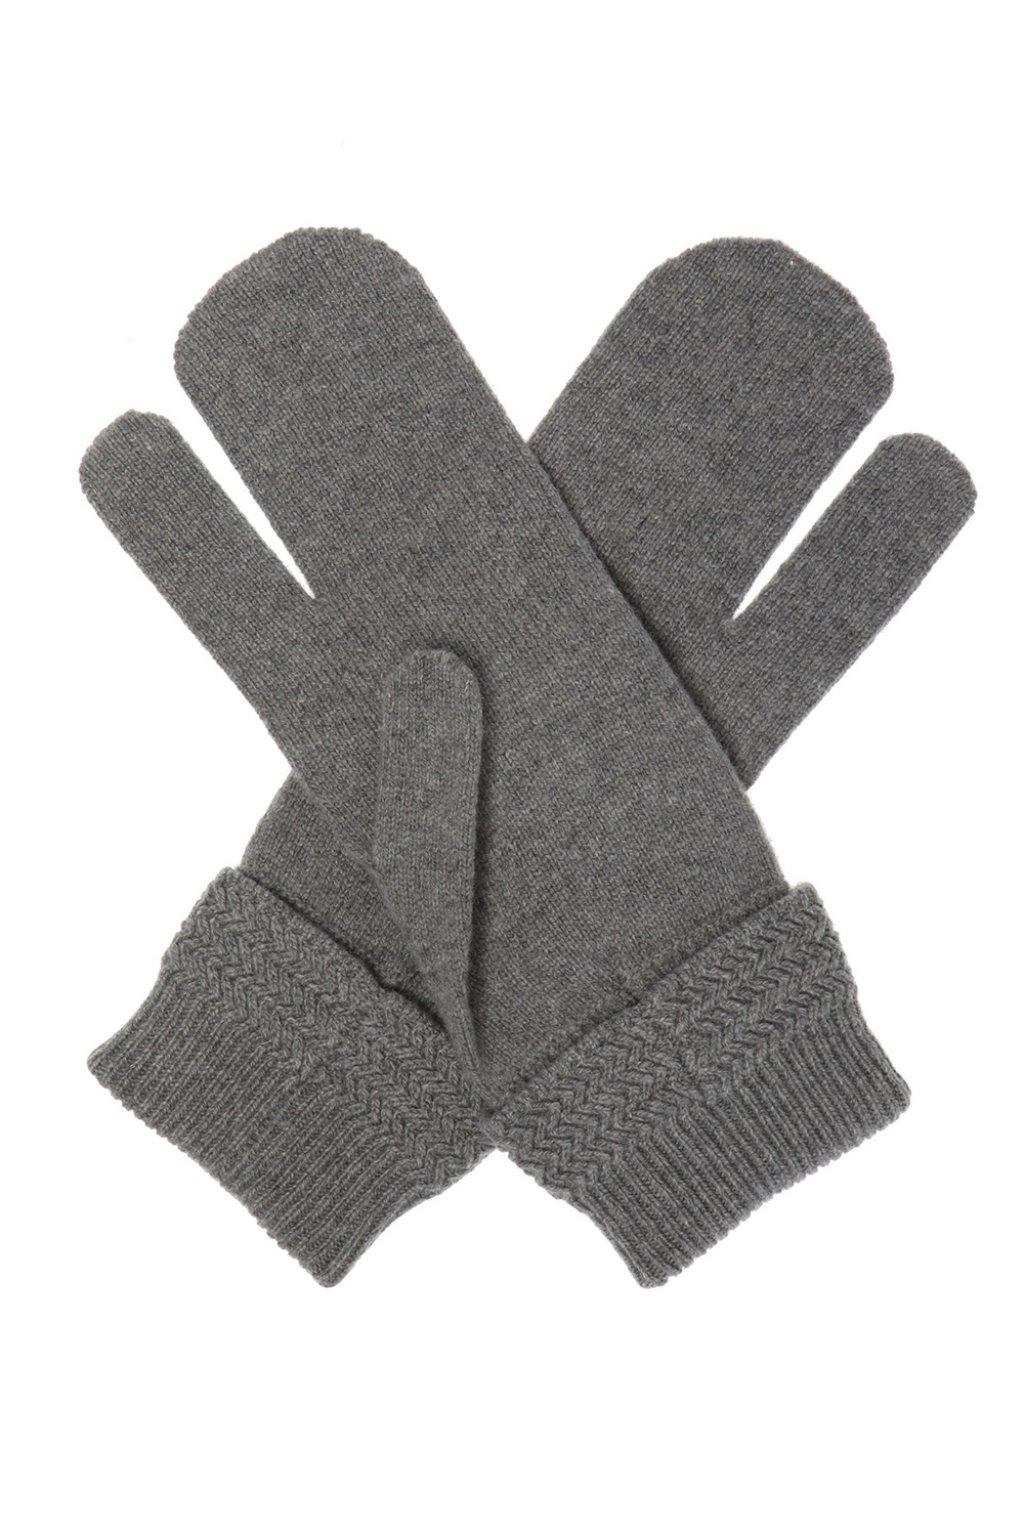 Maison Margiela Wool Embroidered Gloves in White for Men - Lyst